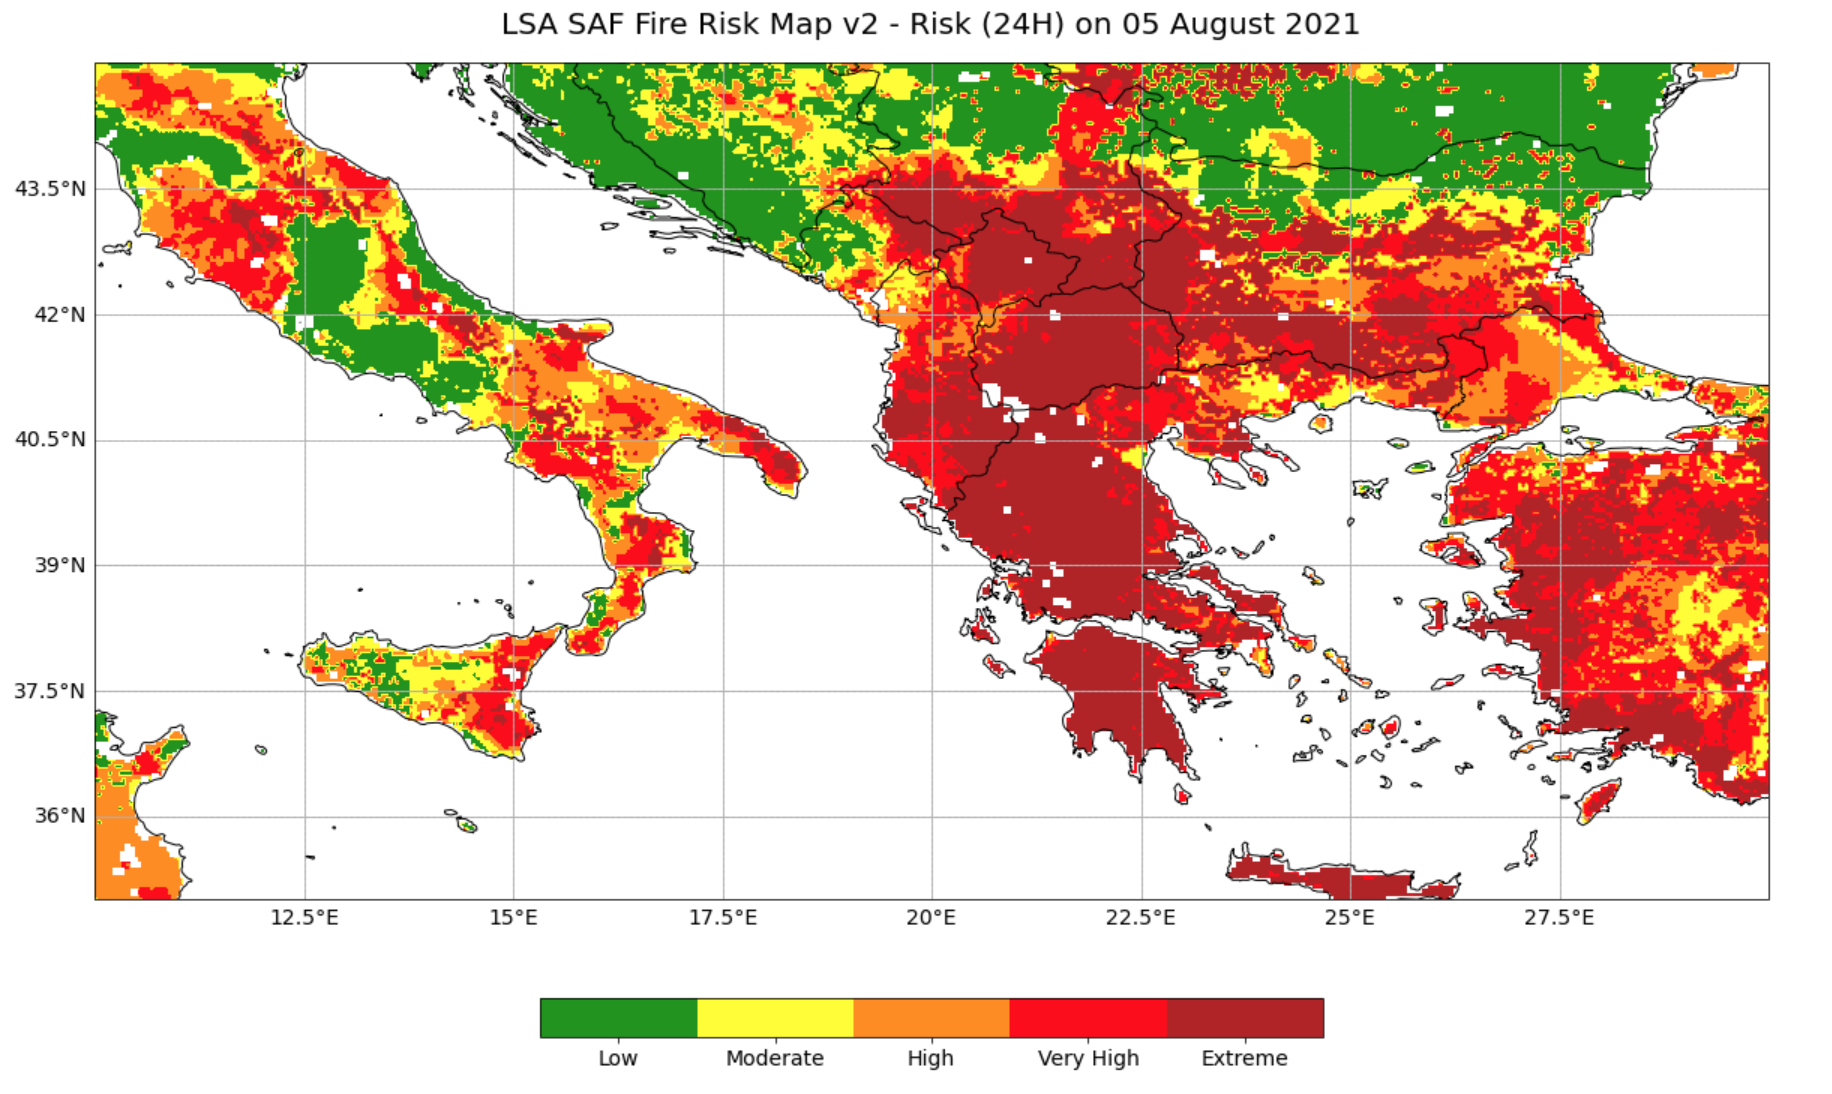 Figure 2. 24-hour forecast of fire risk for 5th August 2021 from LSA SAF.